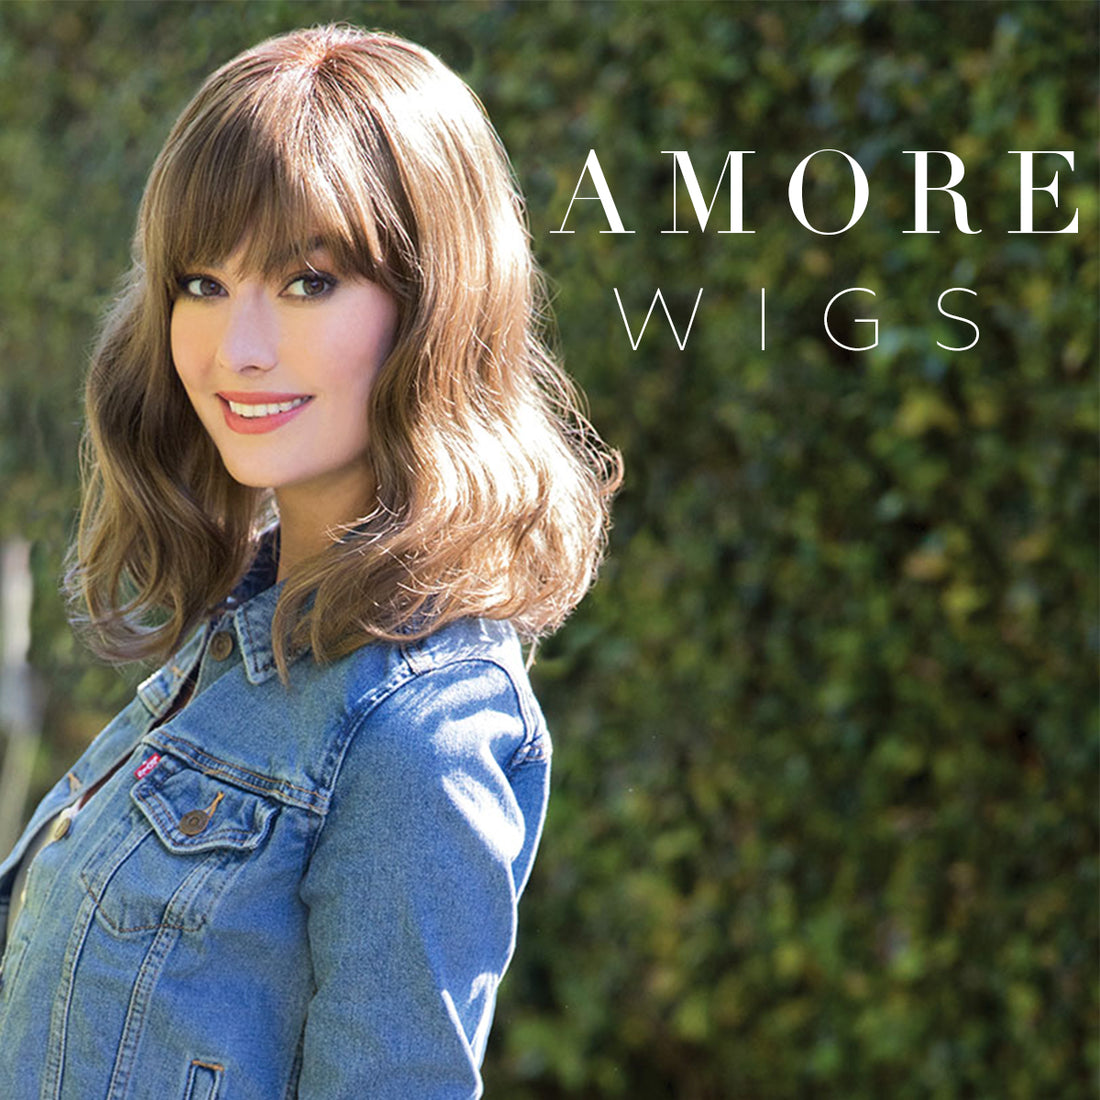 Our Favorite Amore Wigs